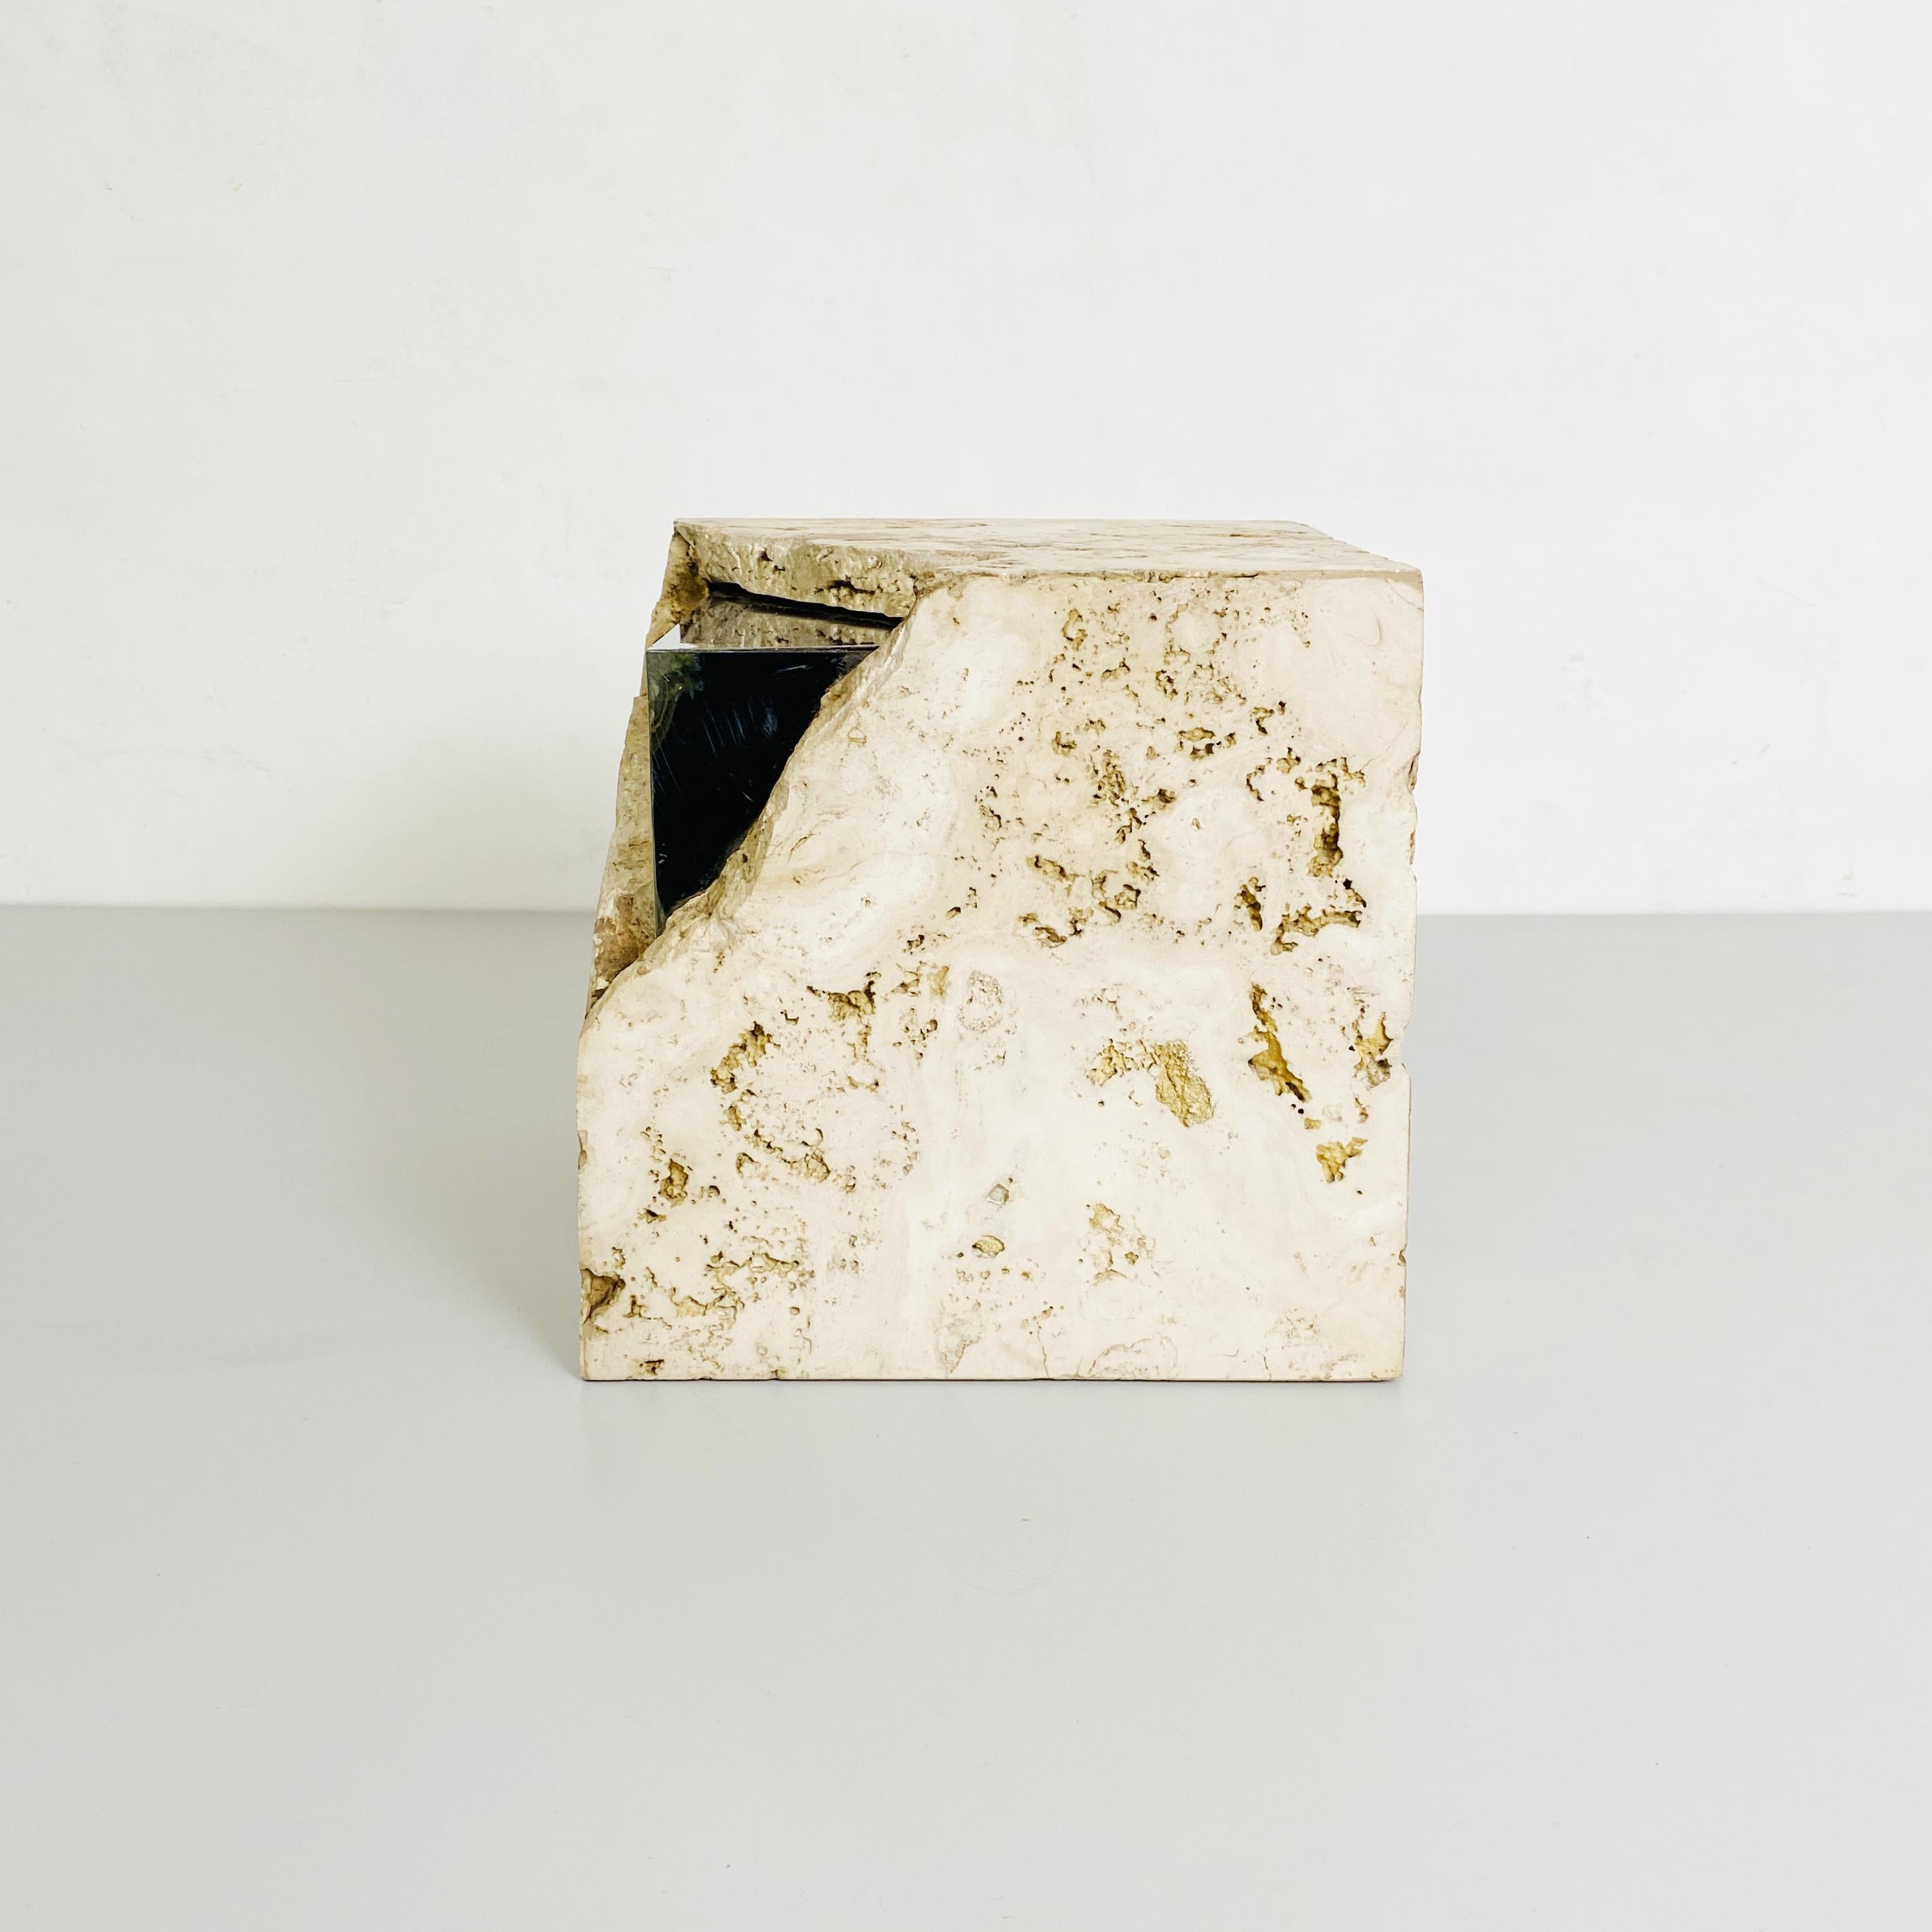 Travertine sculpture, 2000s.
Cubic sculpture in travertine and polished steel signed Pacini.
2000s.

Good condition, some marks on the steel.

Measurements in cm 25 x 25 x 25 H.